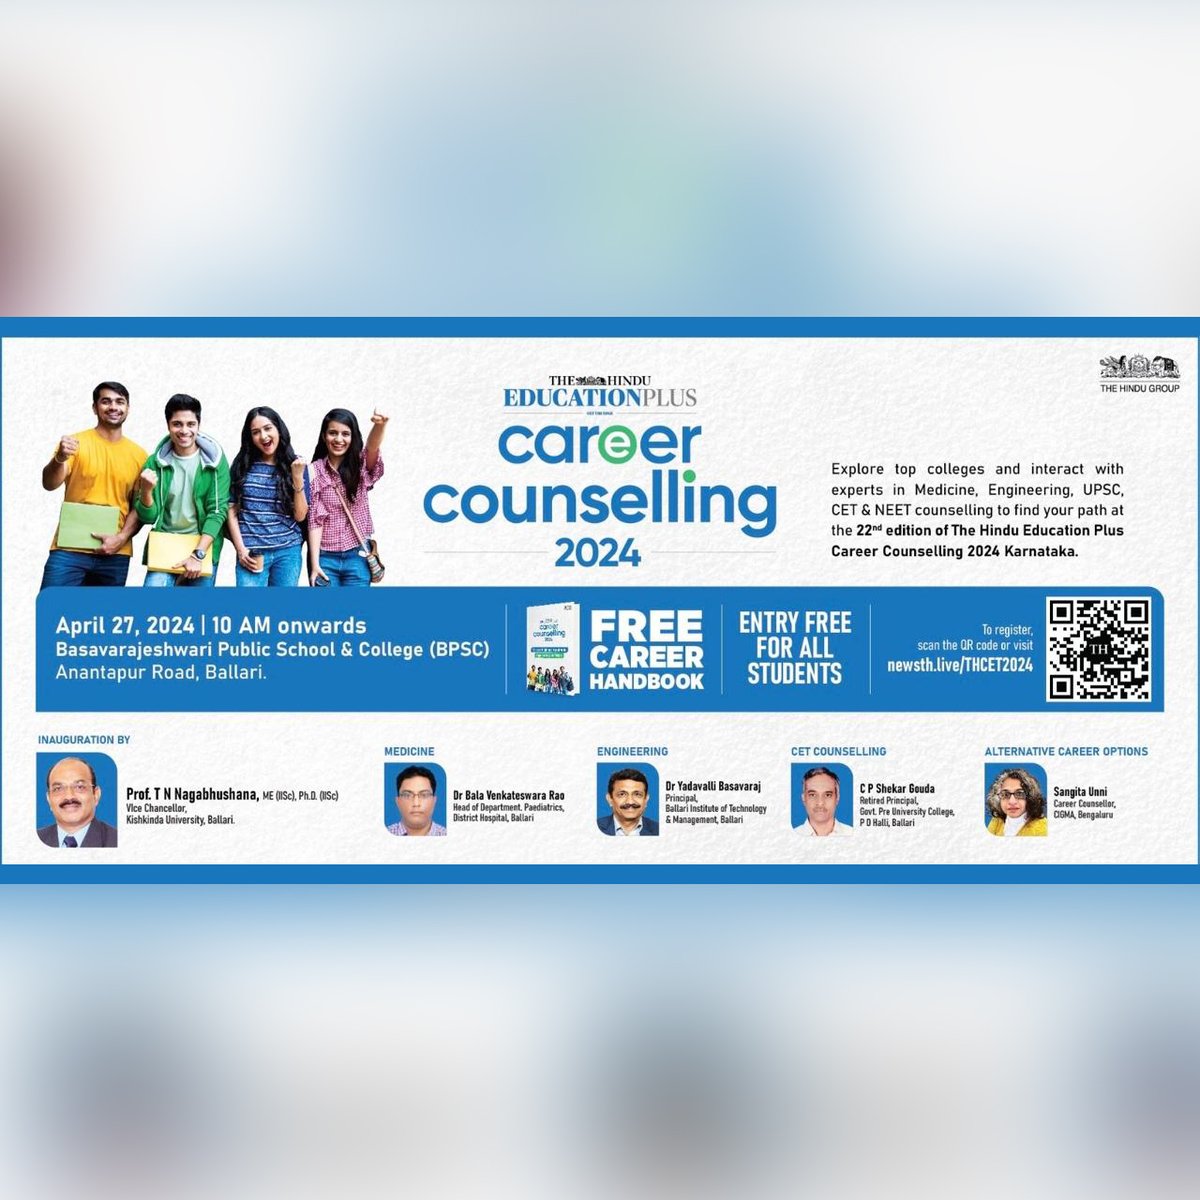 Experience the 22nd edition of #TheHinduEducation Plus #CareerCounselling 2024 Karnataka, where our VC Prof. T N Nagabhushana, will inaugurate the event. Don’t miss #KishkindaUniversity’s stall for future career guidance!

#WorldClassEducation #TransformingLives